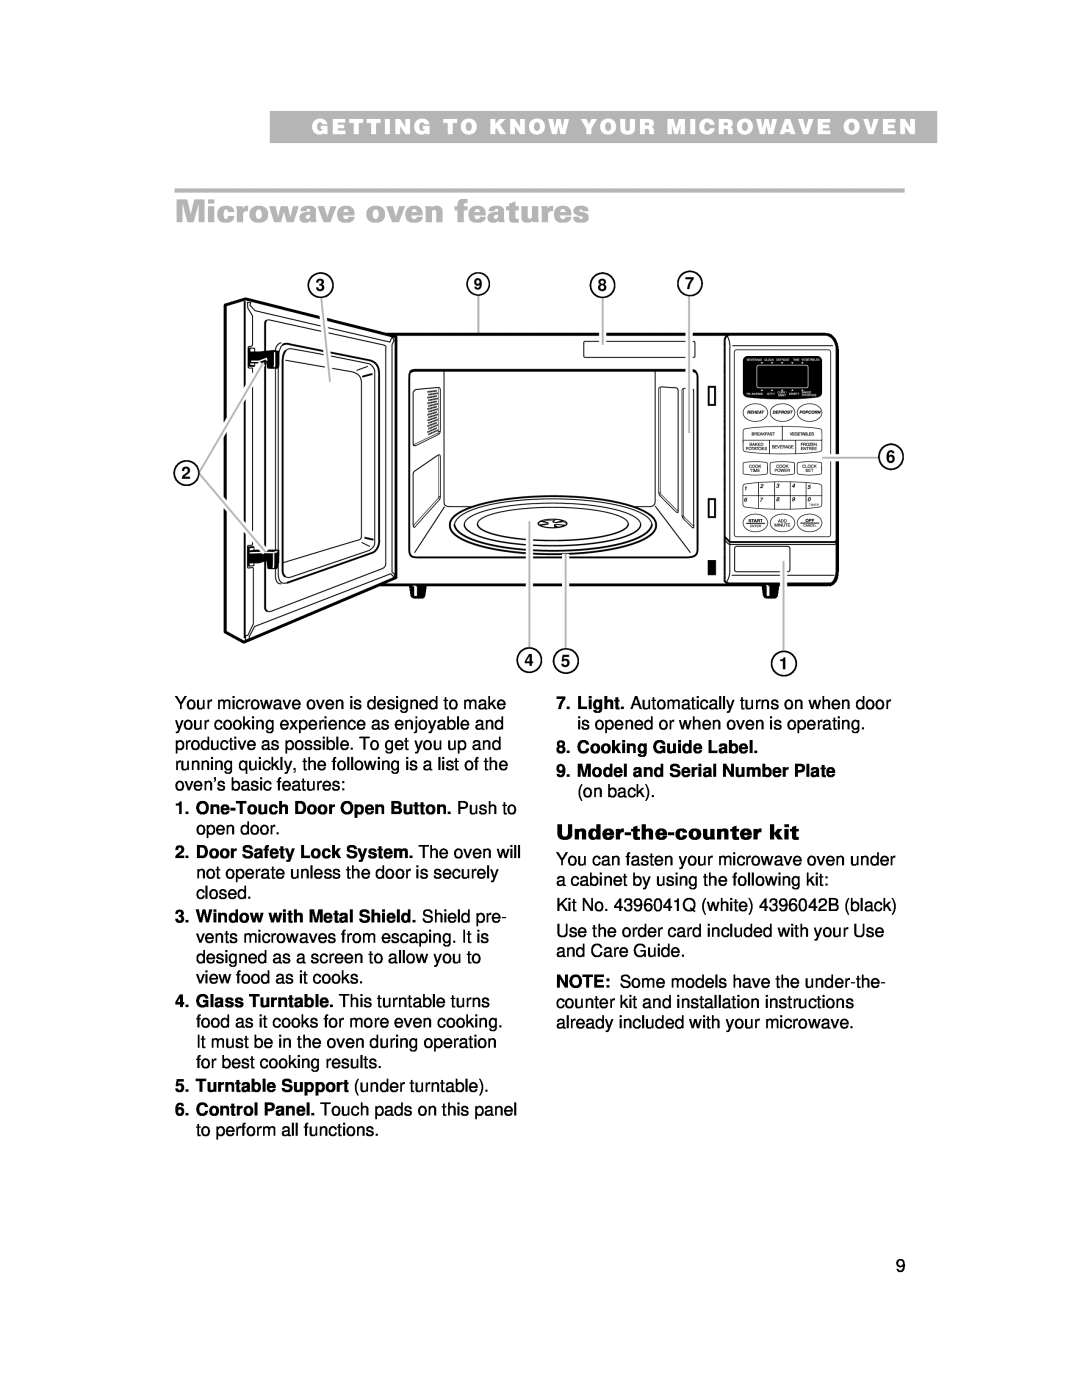 Whirlpool CMT061SG Microwave oven features, Under-the-counter kit, Getting To Know Your Microwave Oven 